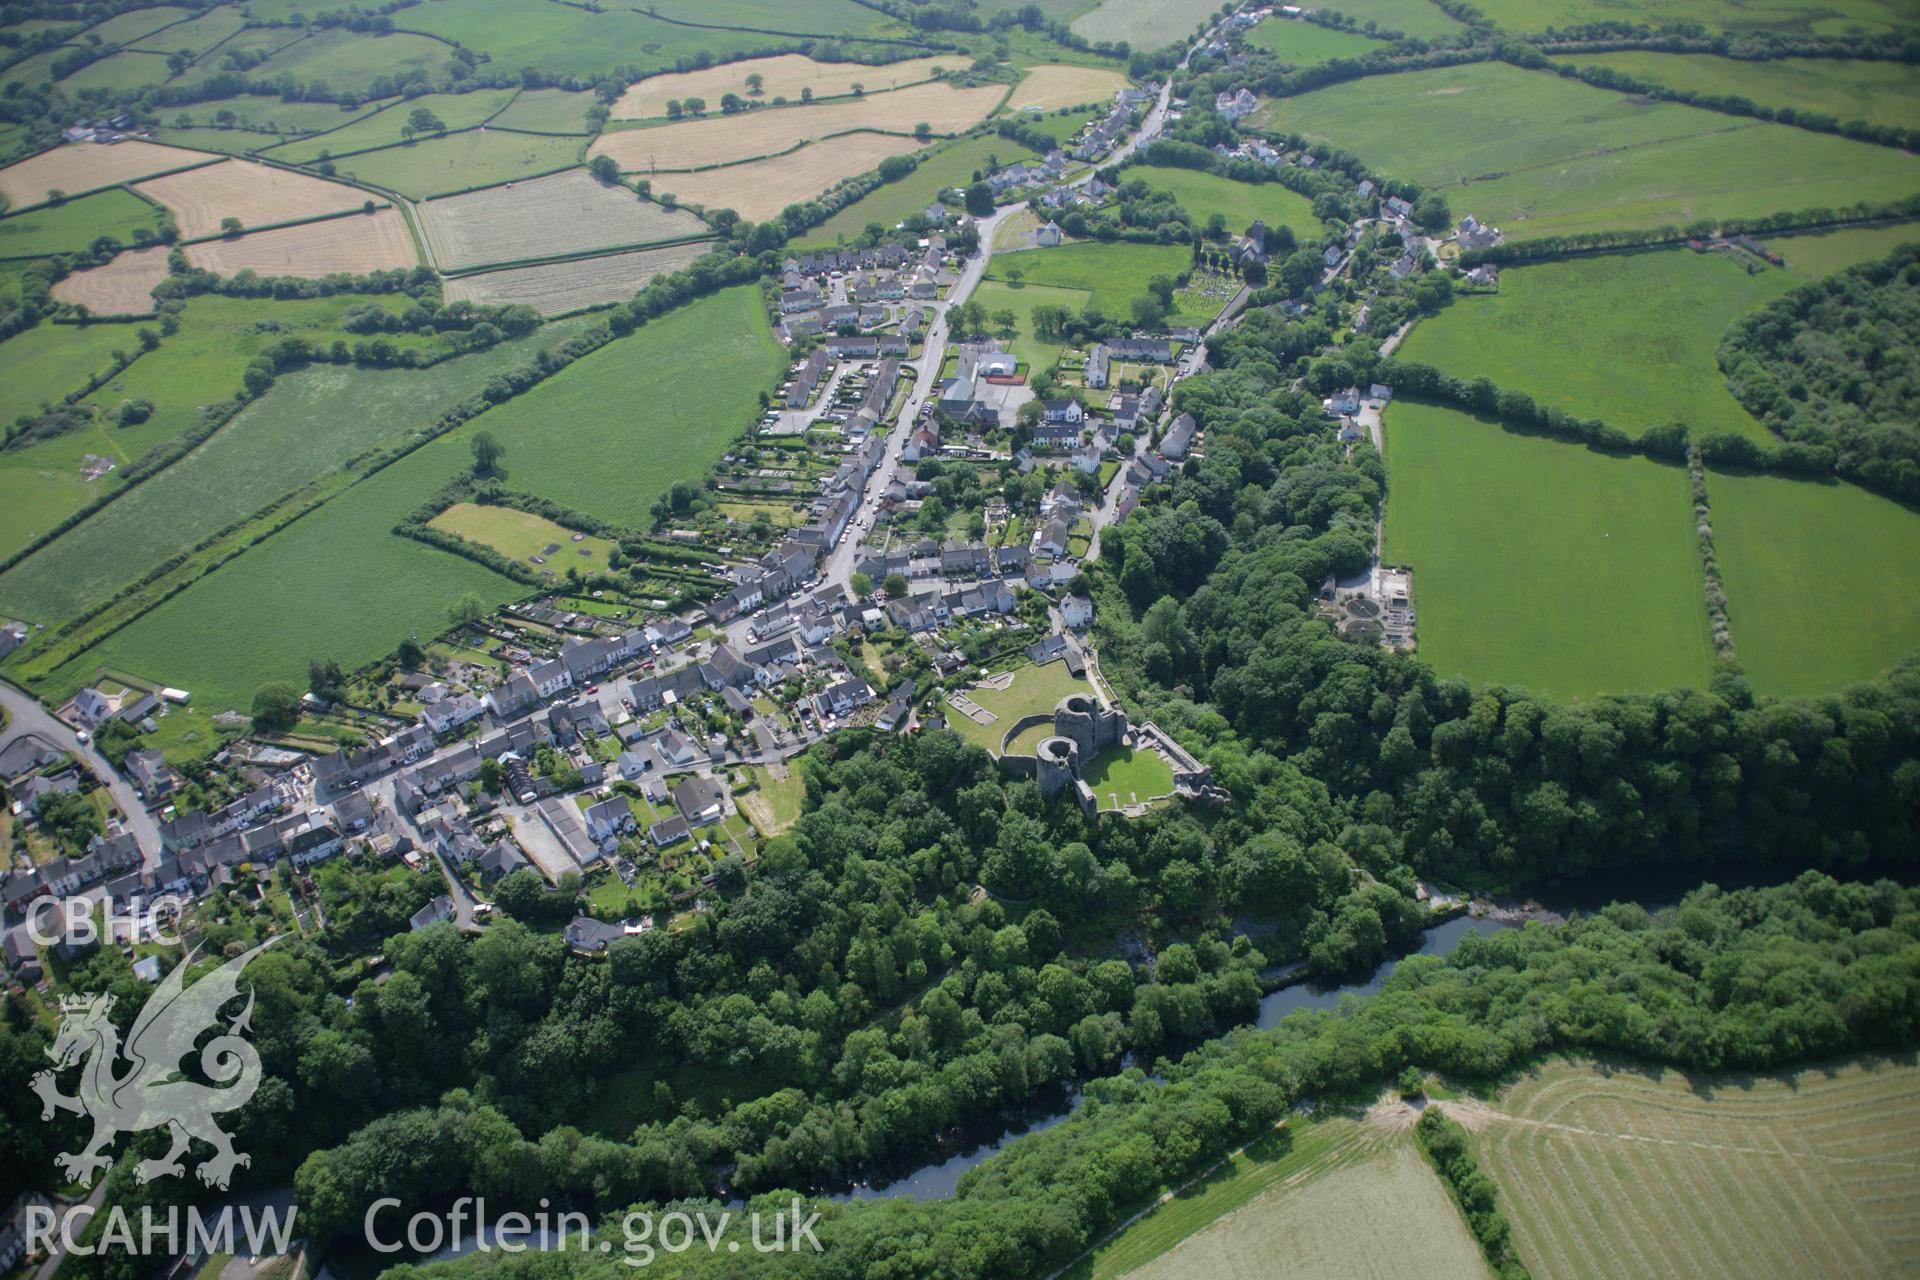 RCAHMW colour oblique aerial photograph of Cilgerran Castle. A high view from the north-east. Taken on 08 June 2006 by Toby Driver.